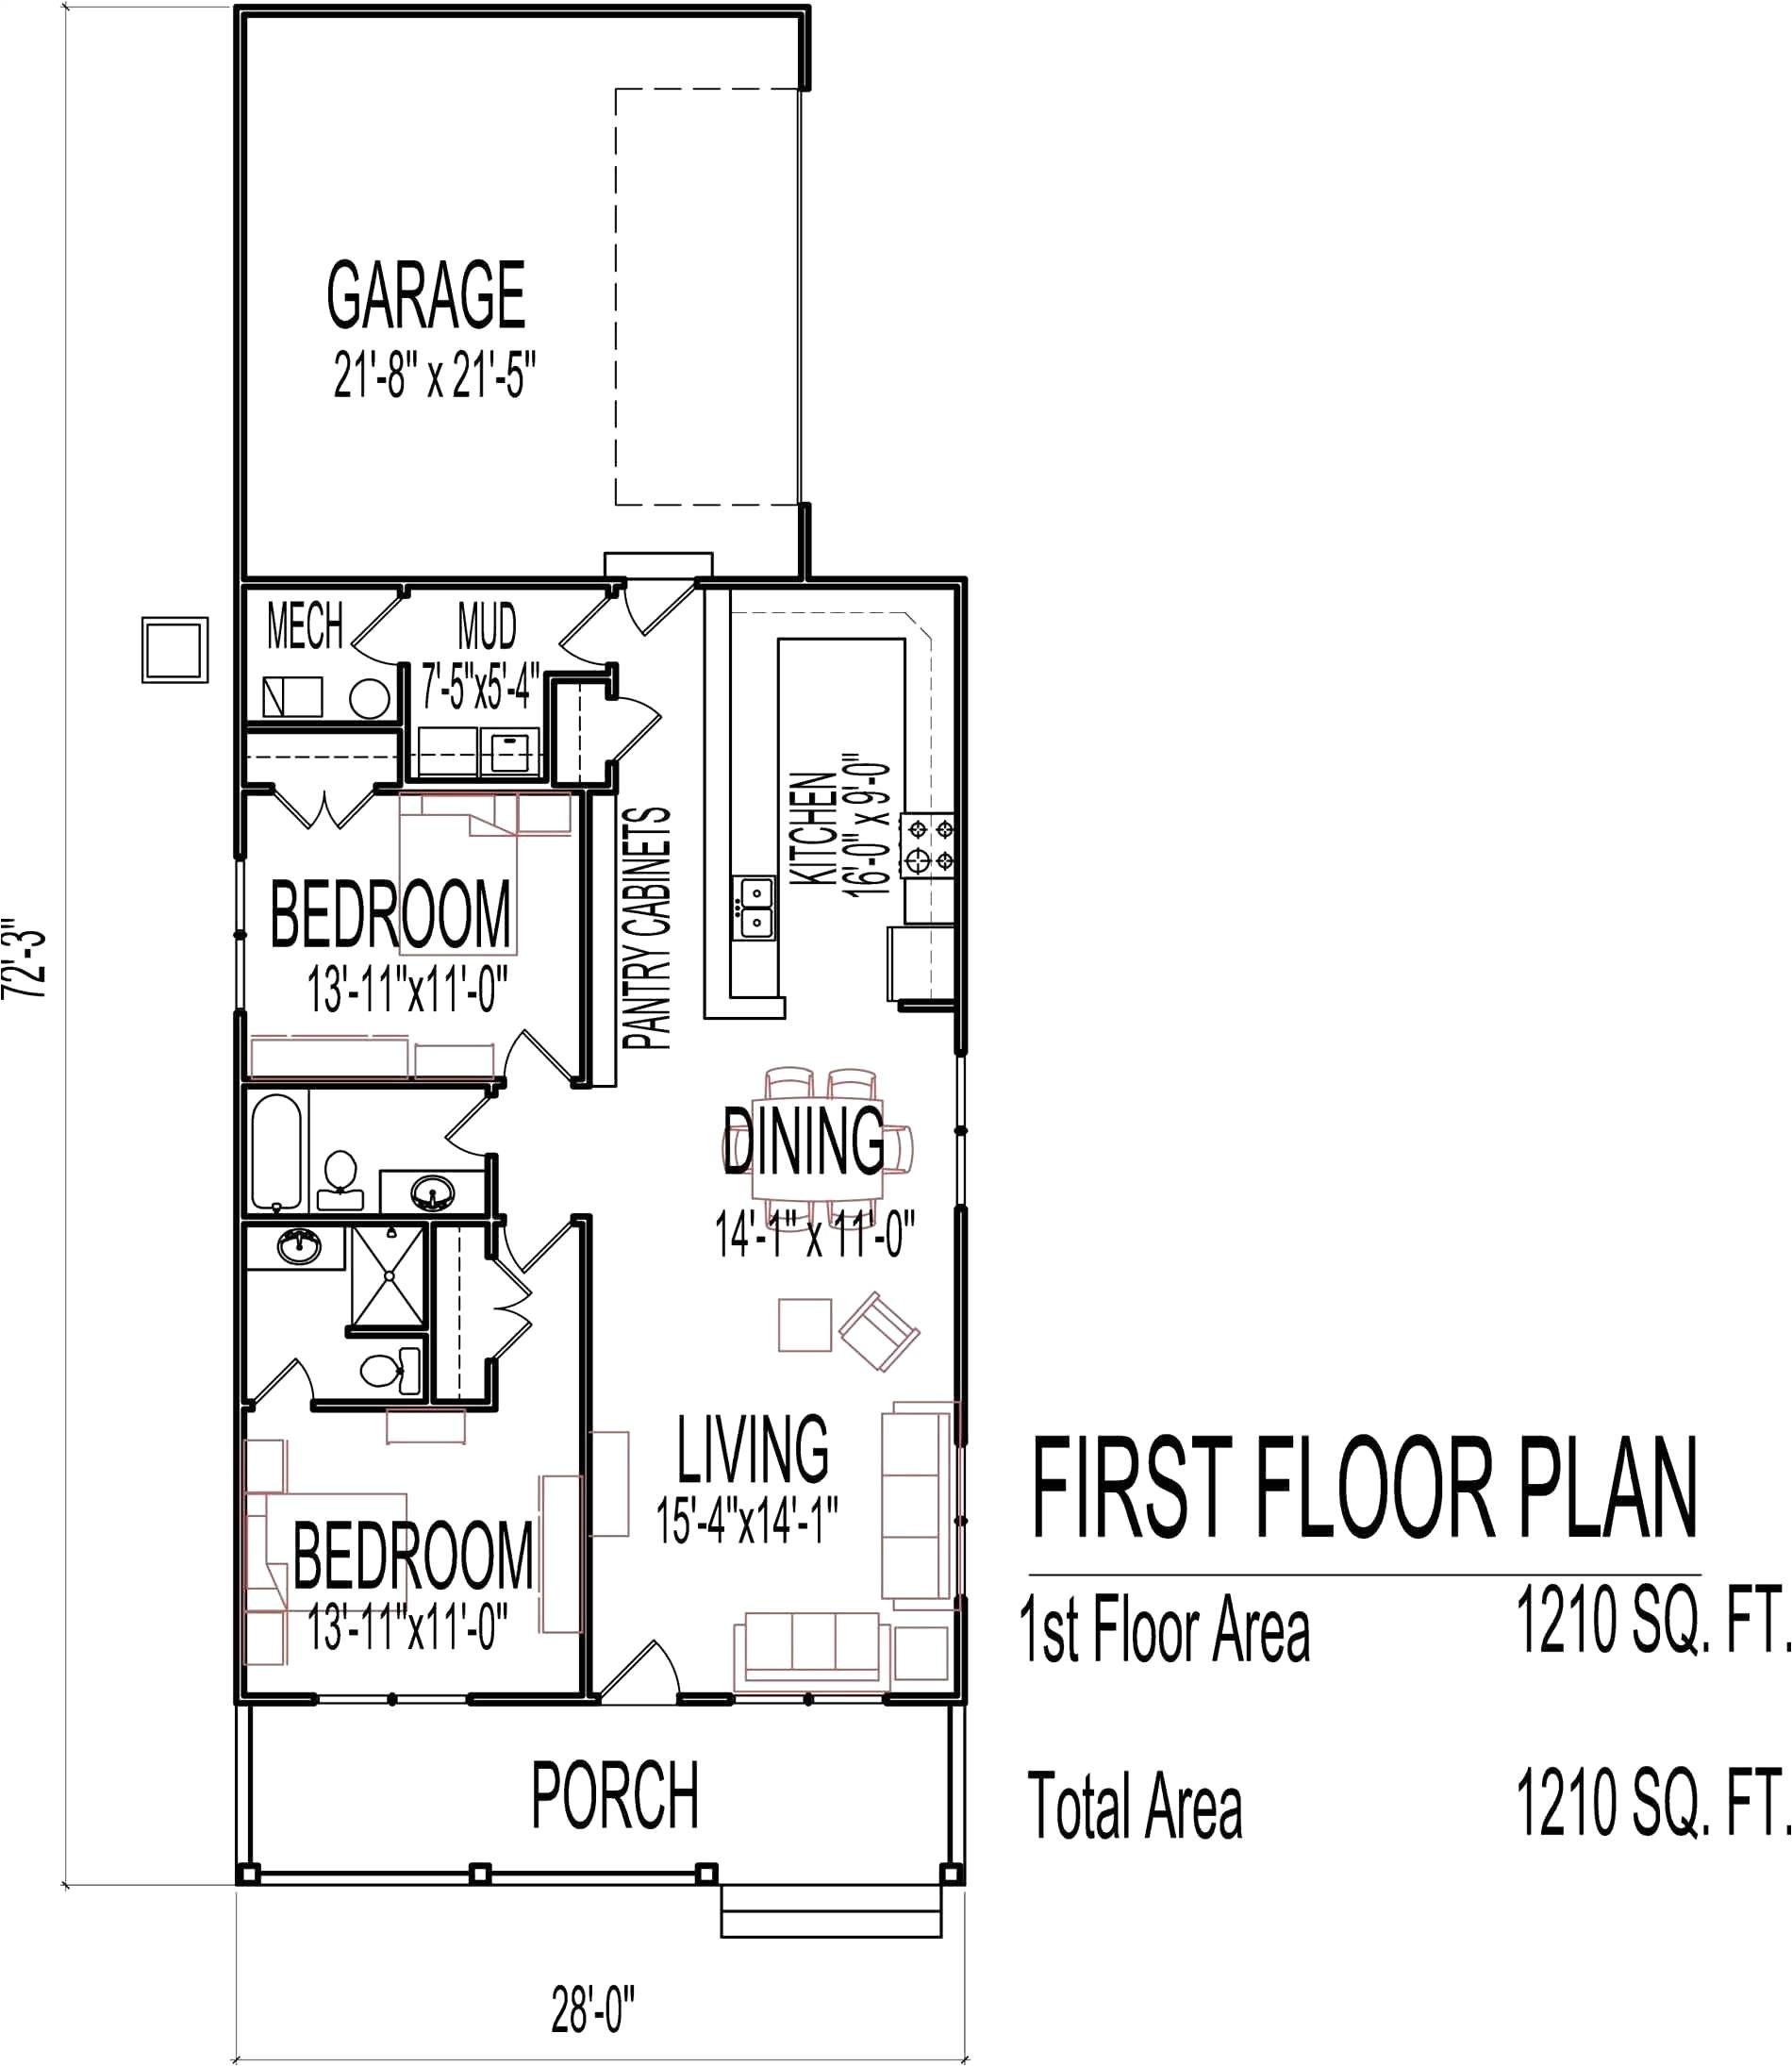 home plans with pictures best of 2 bedroom metal home plans luxury free floor plan inspirational